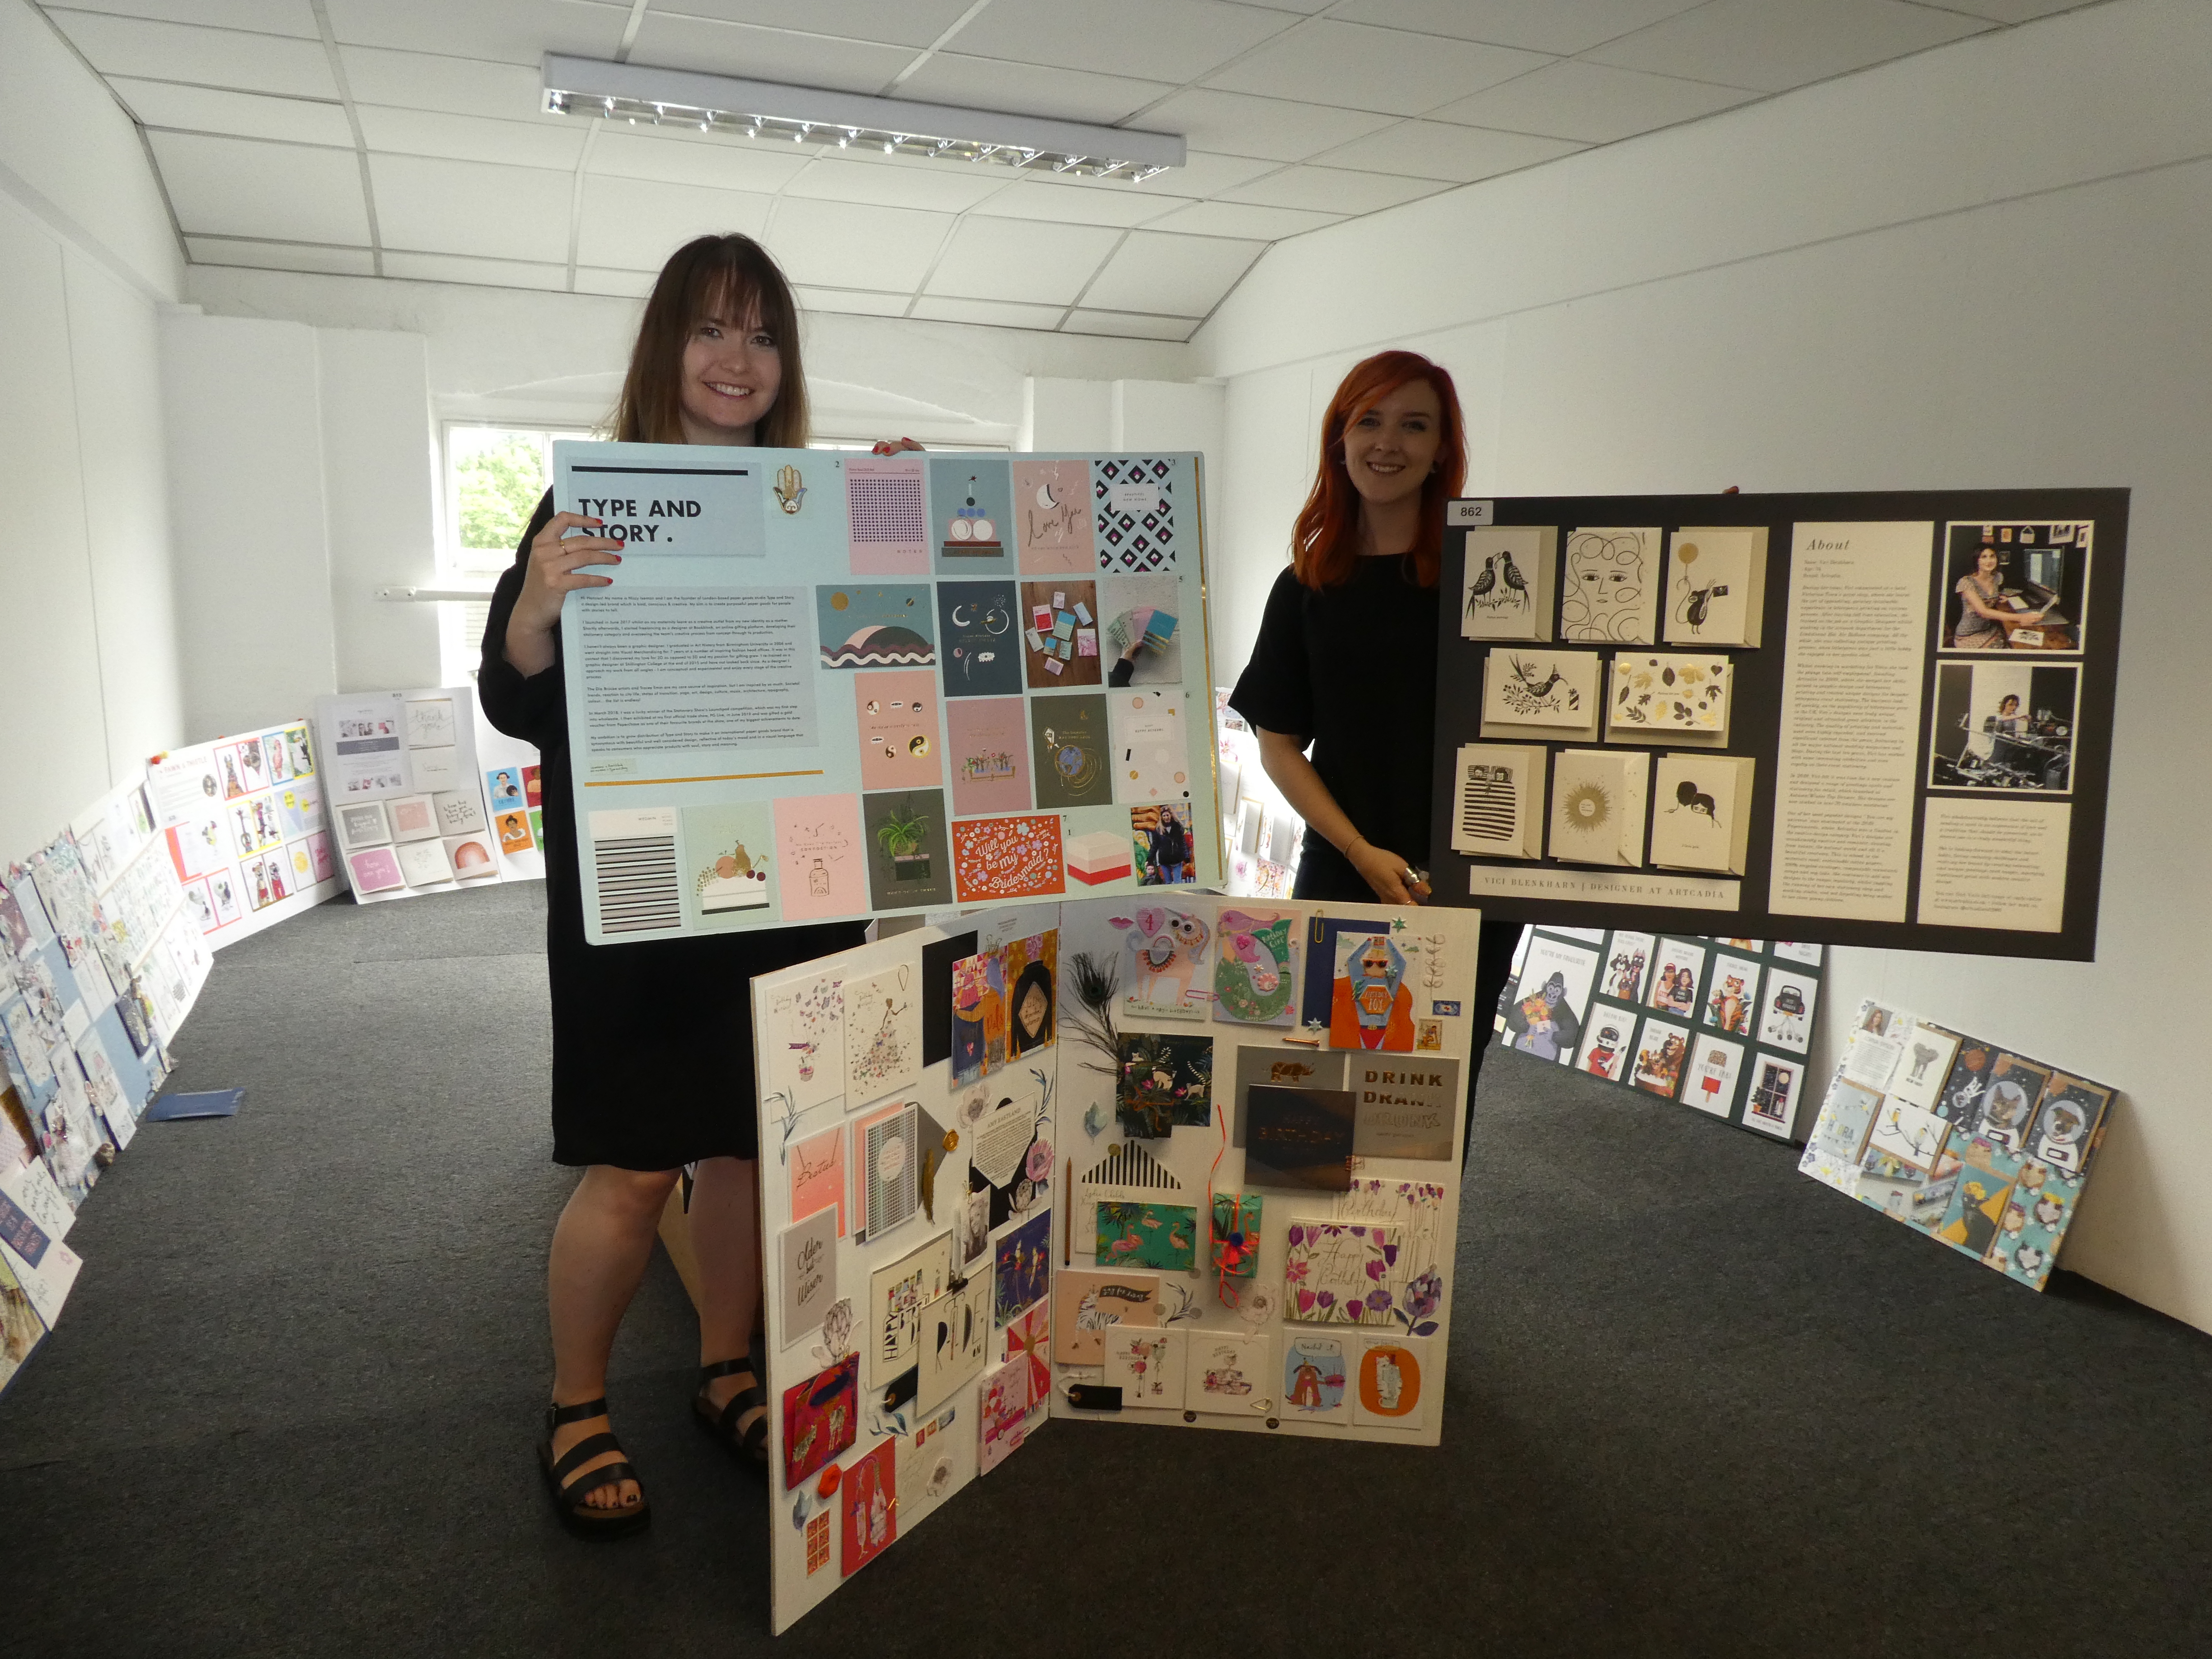 Above: As sponsor of The Lynn Tait Most Promising Young Designer or Artist award, Paperchase’s Daisy Enticott (left) and Megan Douglas especially enjoyed judging that category.